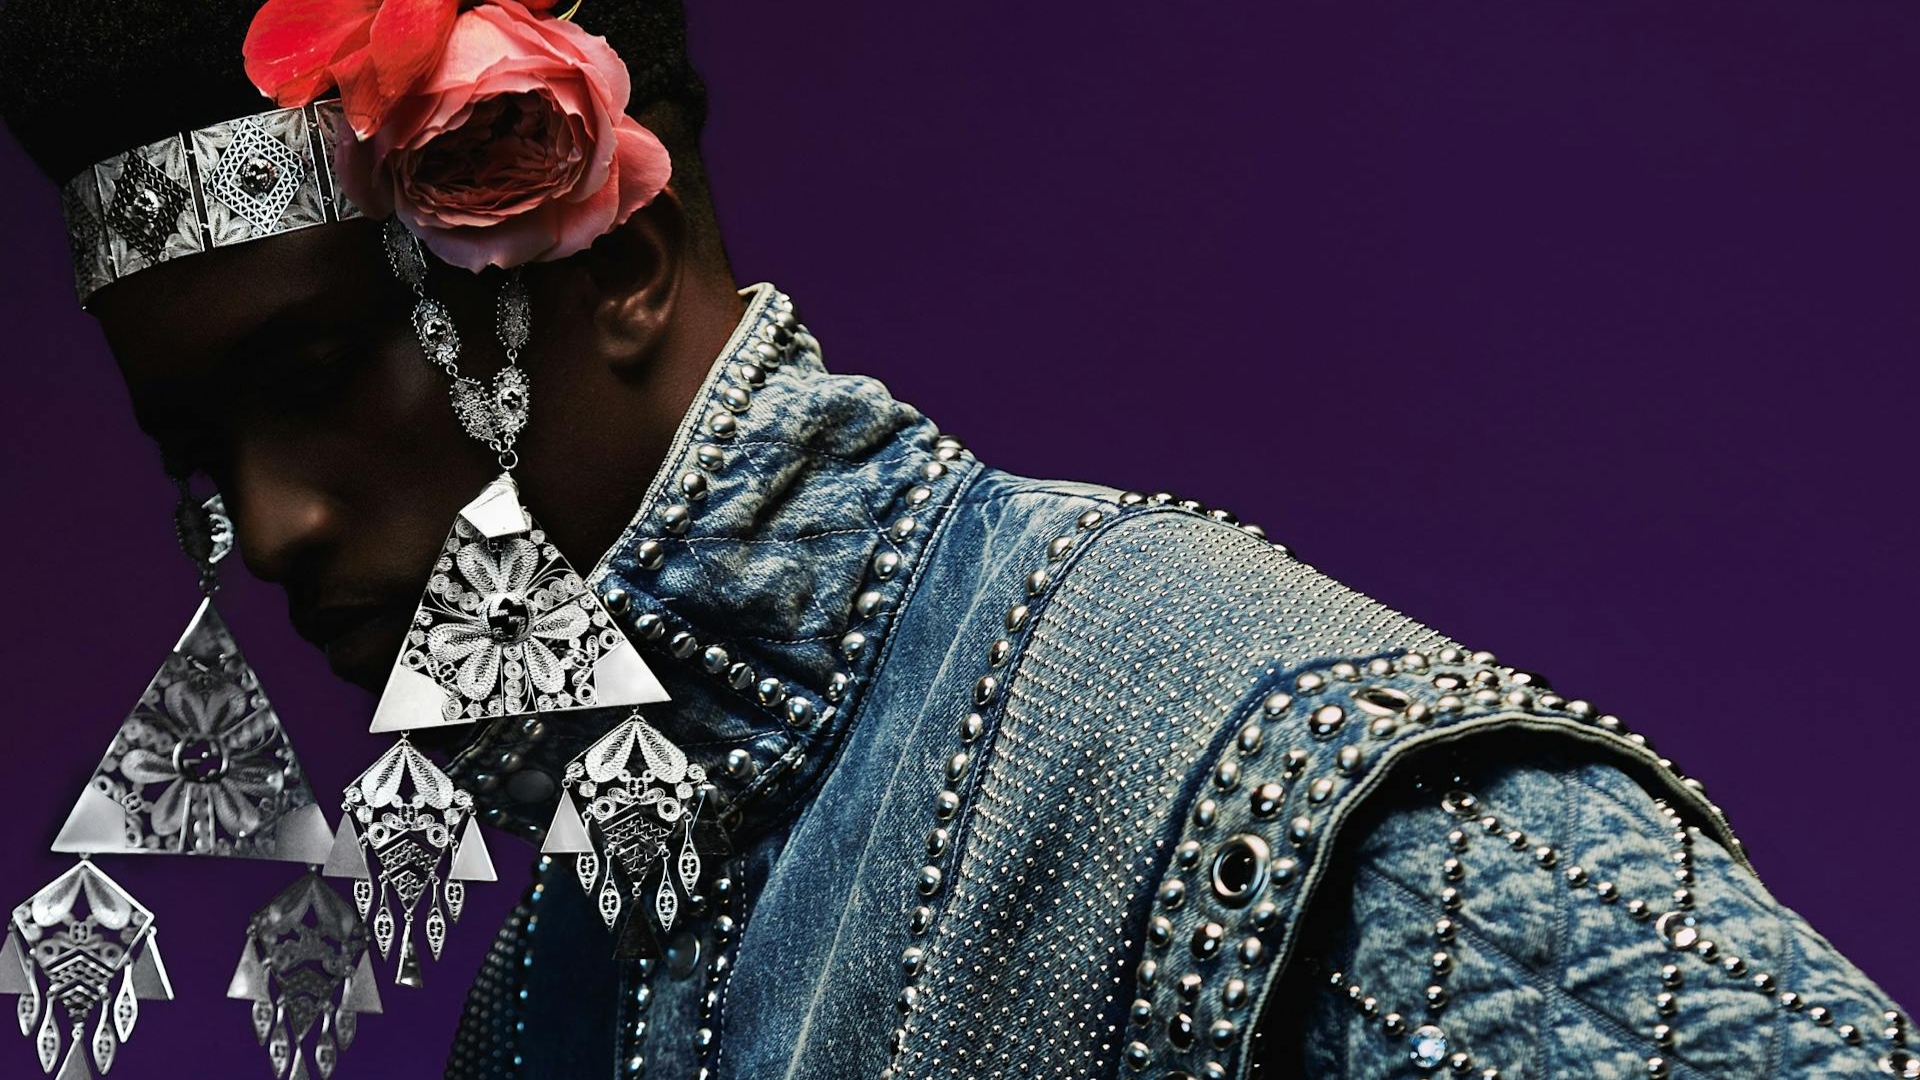 Black man adorned with rose headpiece and silver jewelry